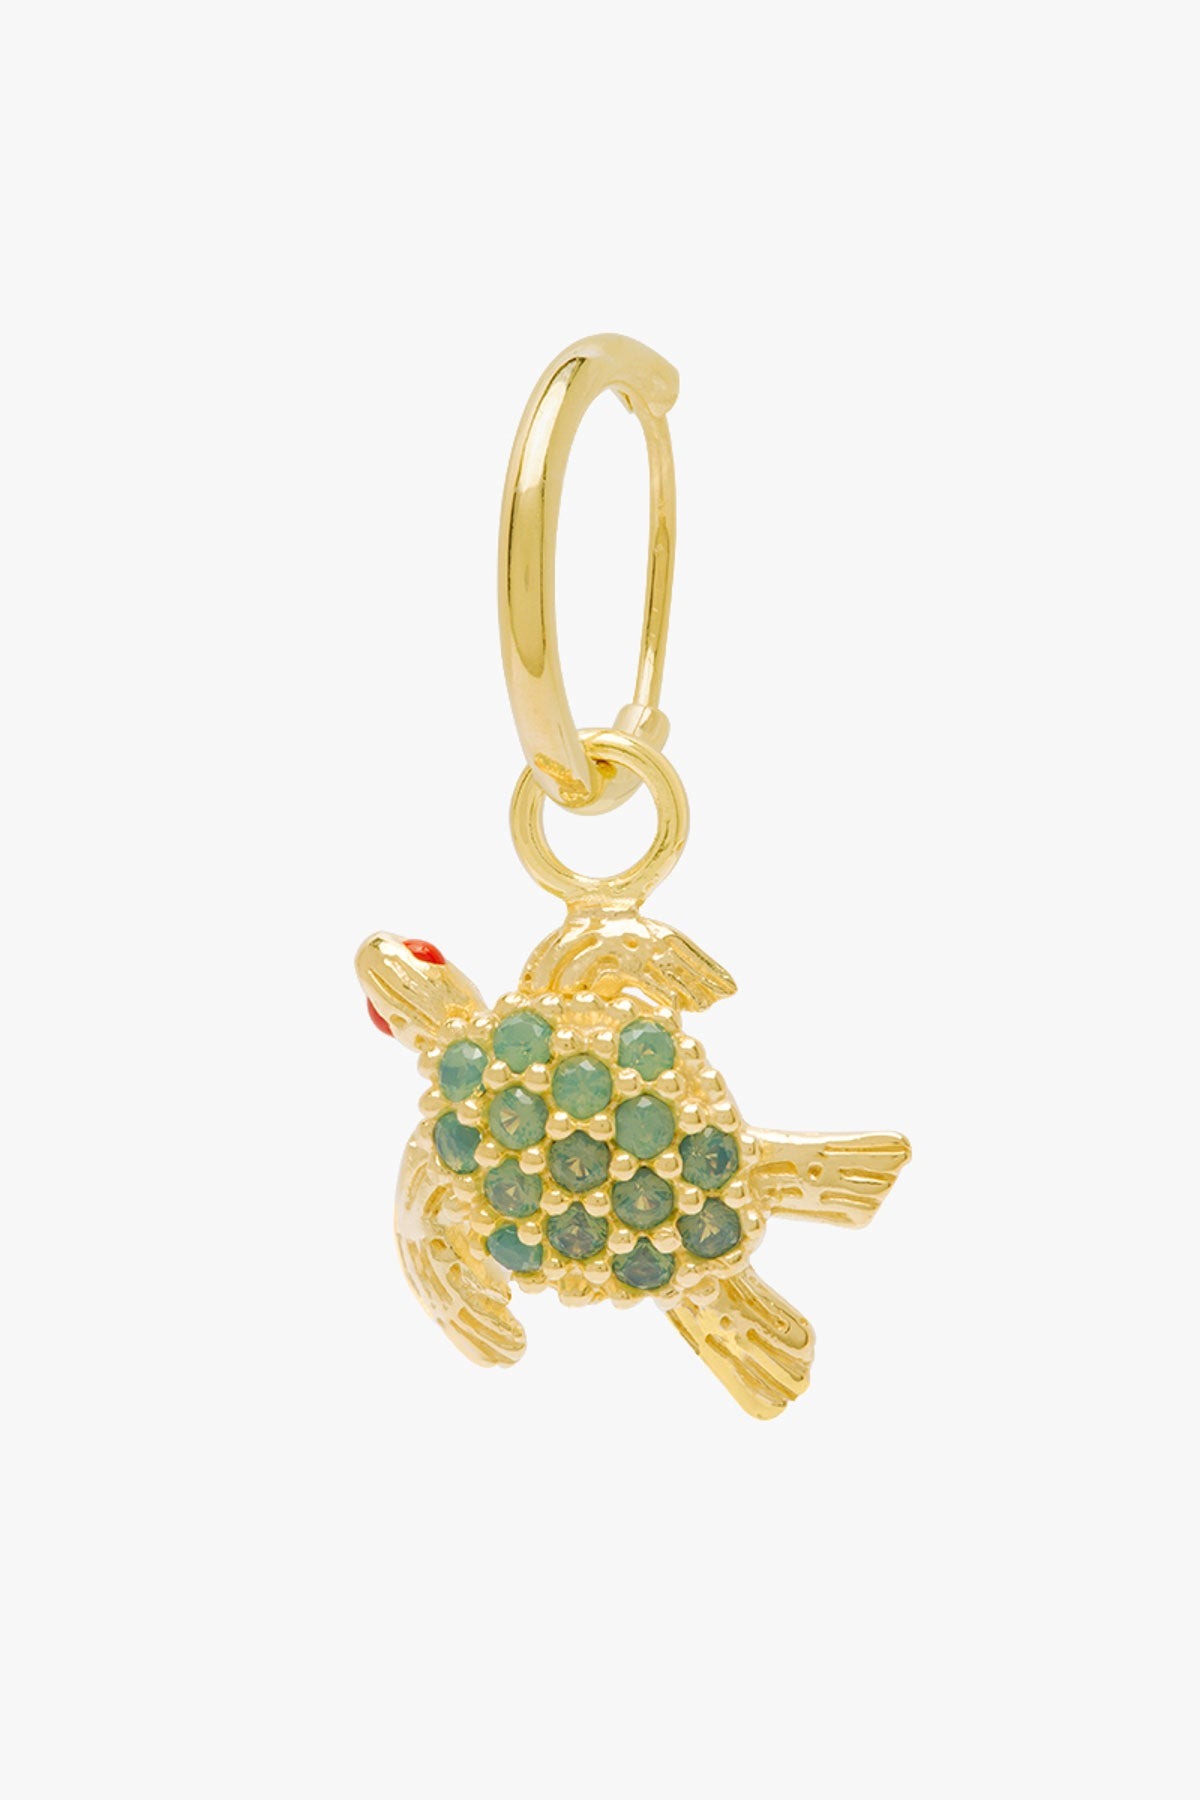 wildthings collectables - Under the sea turtle earring gold plated